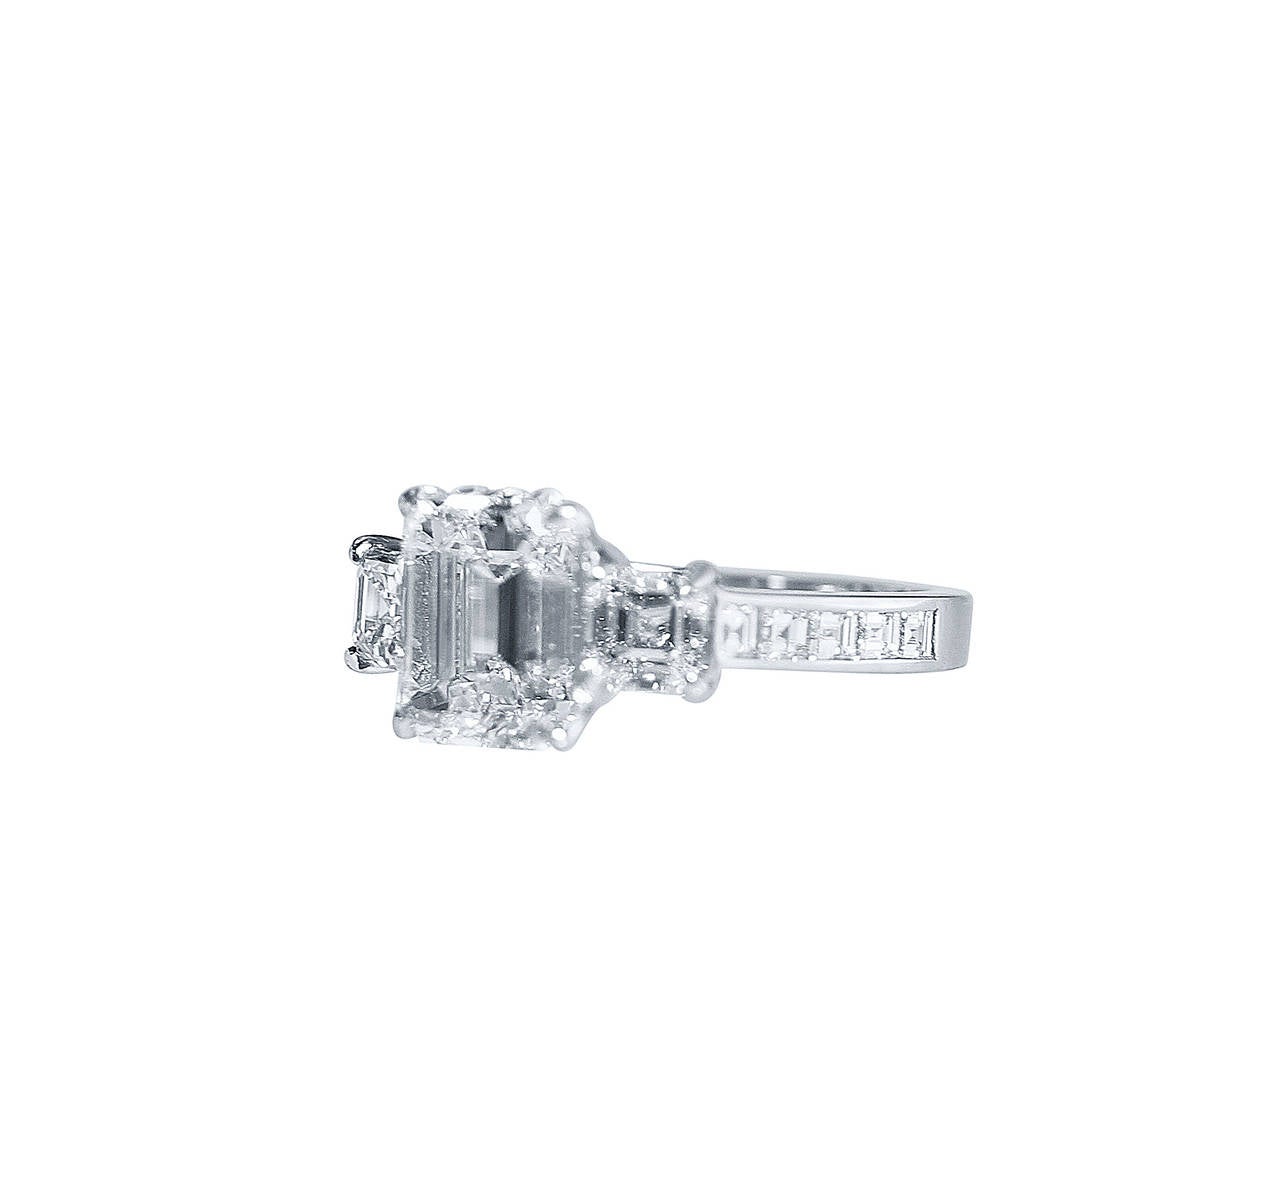 A  platinum and diamond ring, set in the center with an emerald-cut diamond weighing 2.67 carats, flanked by 2 asscher-cut and 10 square-cut diamonds weighing a total of approximately 1.10 carats, size 6, gross weight of 6.9 grams.

Accompanied